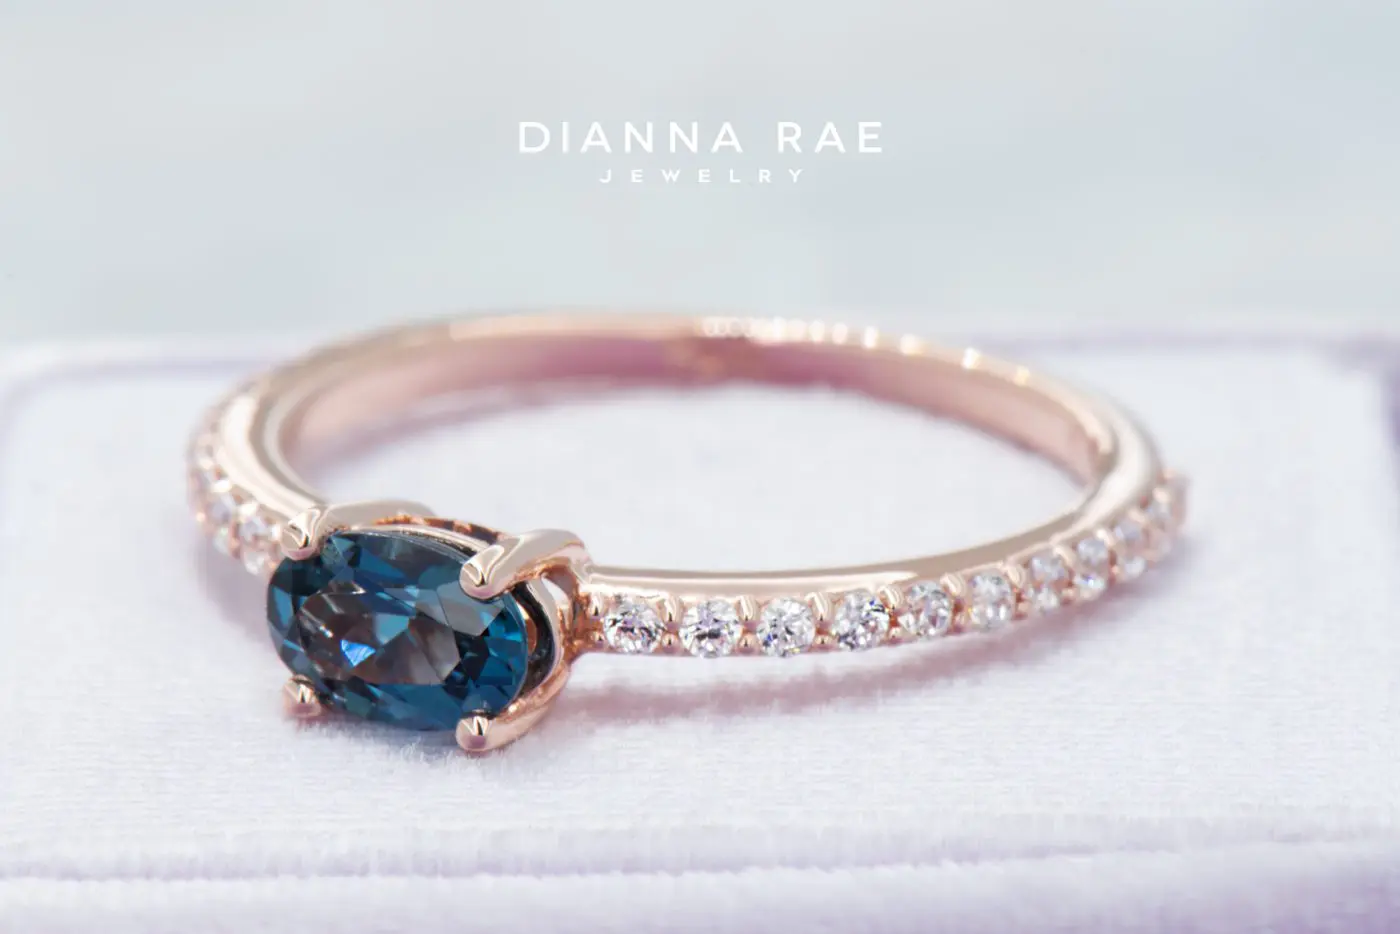 001-210-00061_STU122190_Rose-Gold-Oval-East-West-London-Blue-Topaz-Class-Ring-with-Cubic-Zirconia-Band-Stackable-Ring_02-1